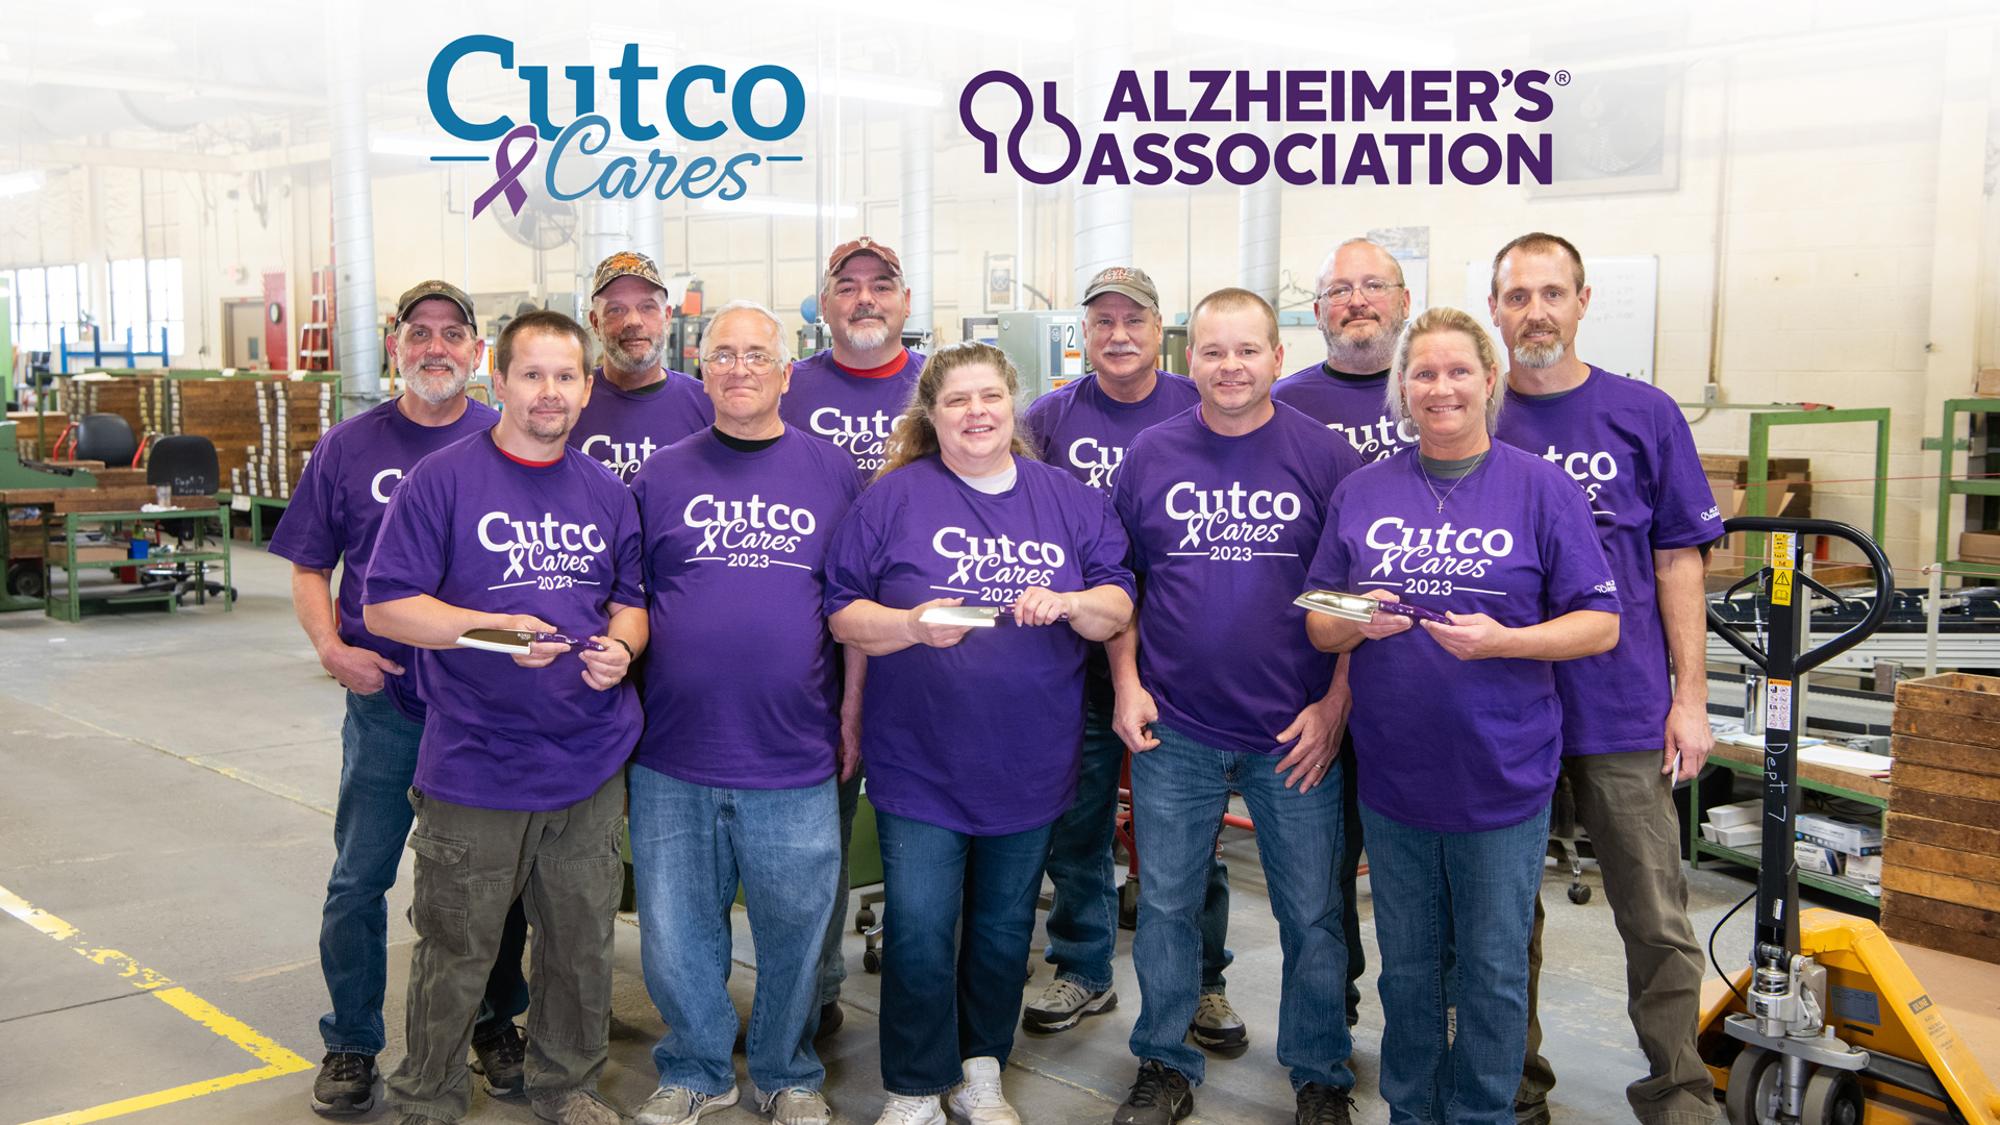 Purple Cutco Product Supports the Alzheimer's Association®